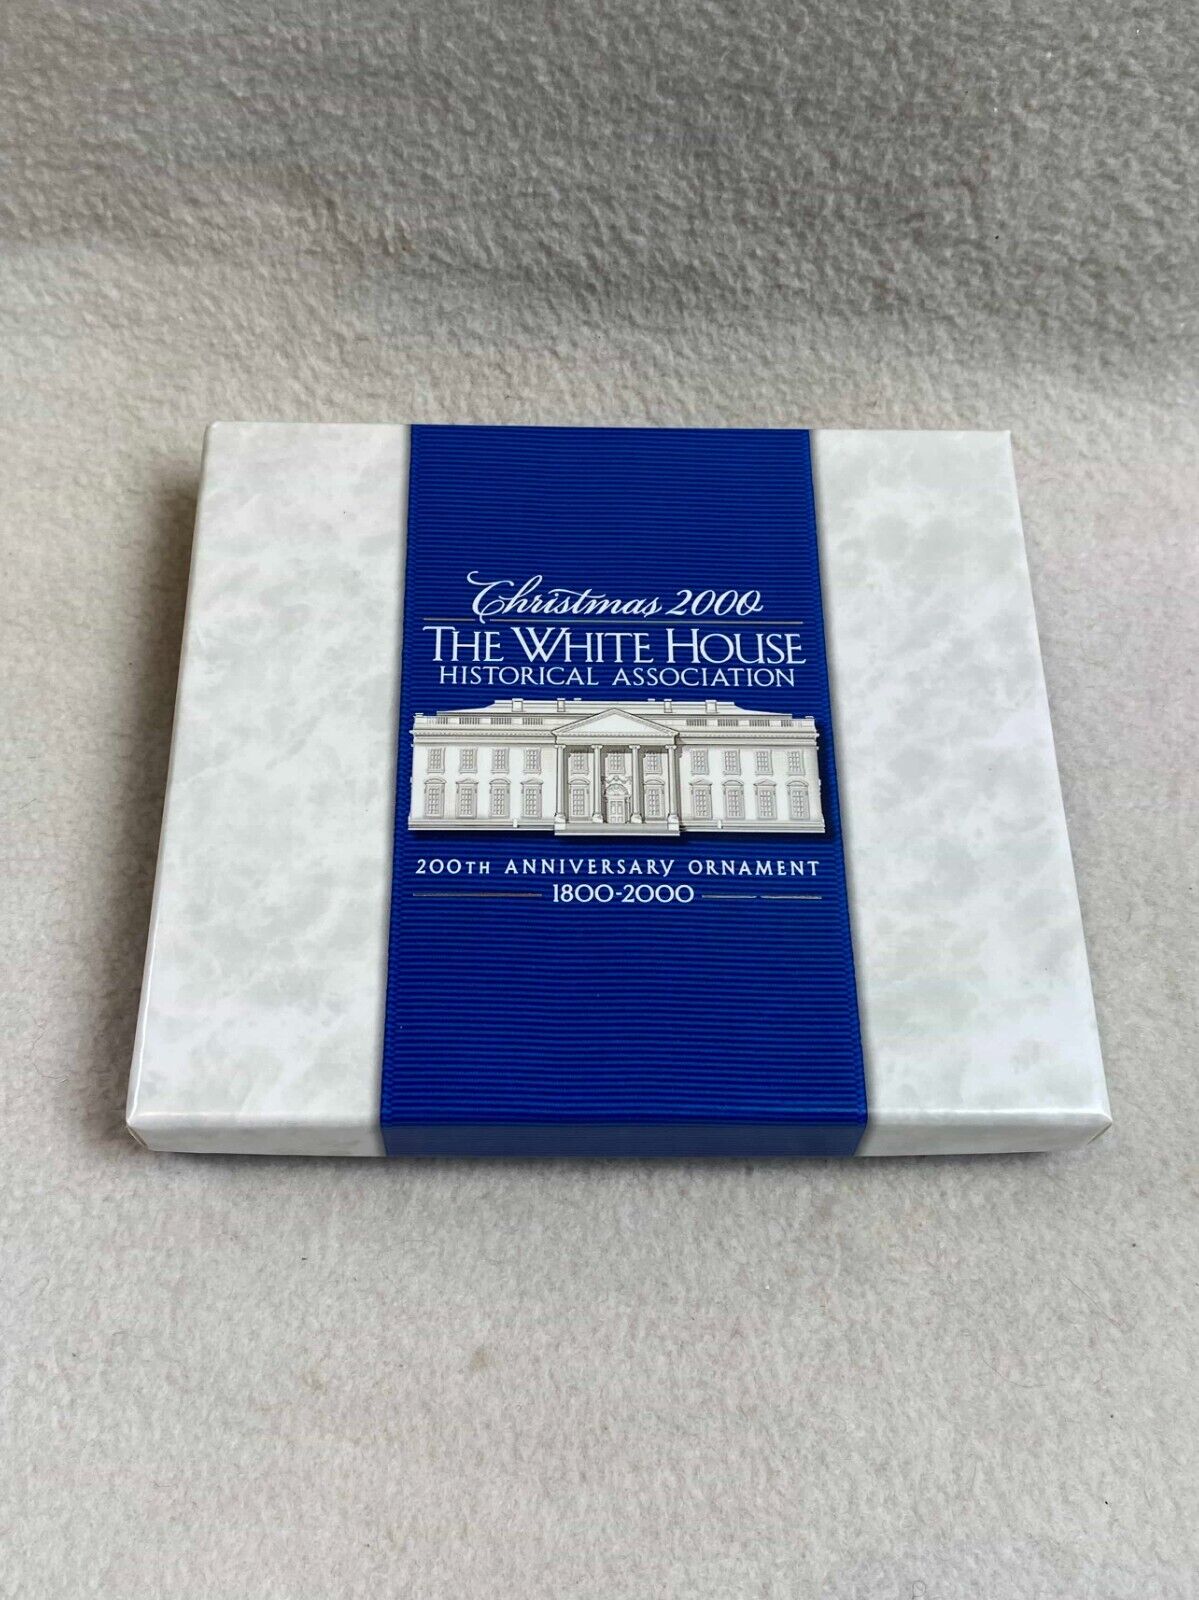 Vintage Christmas 2000 The White House Anniversary Ornament (new in box)